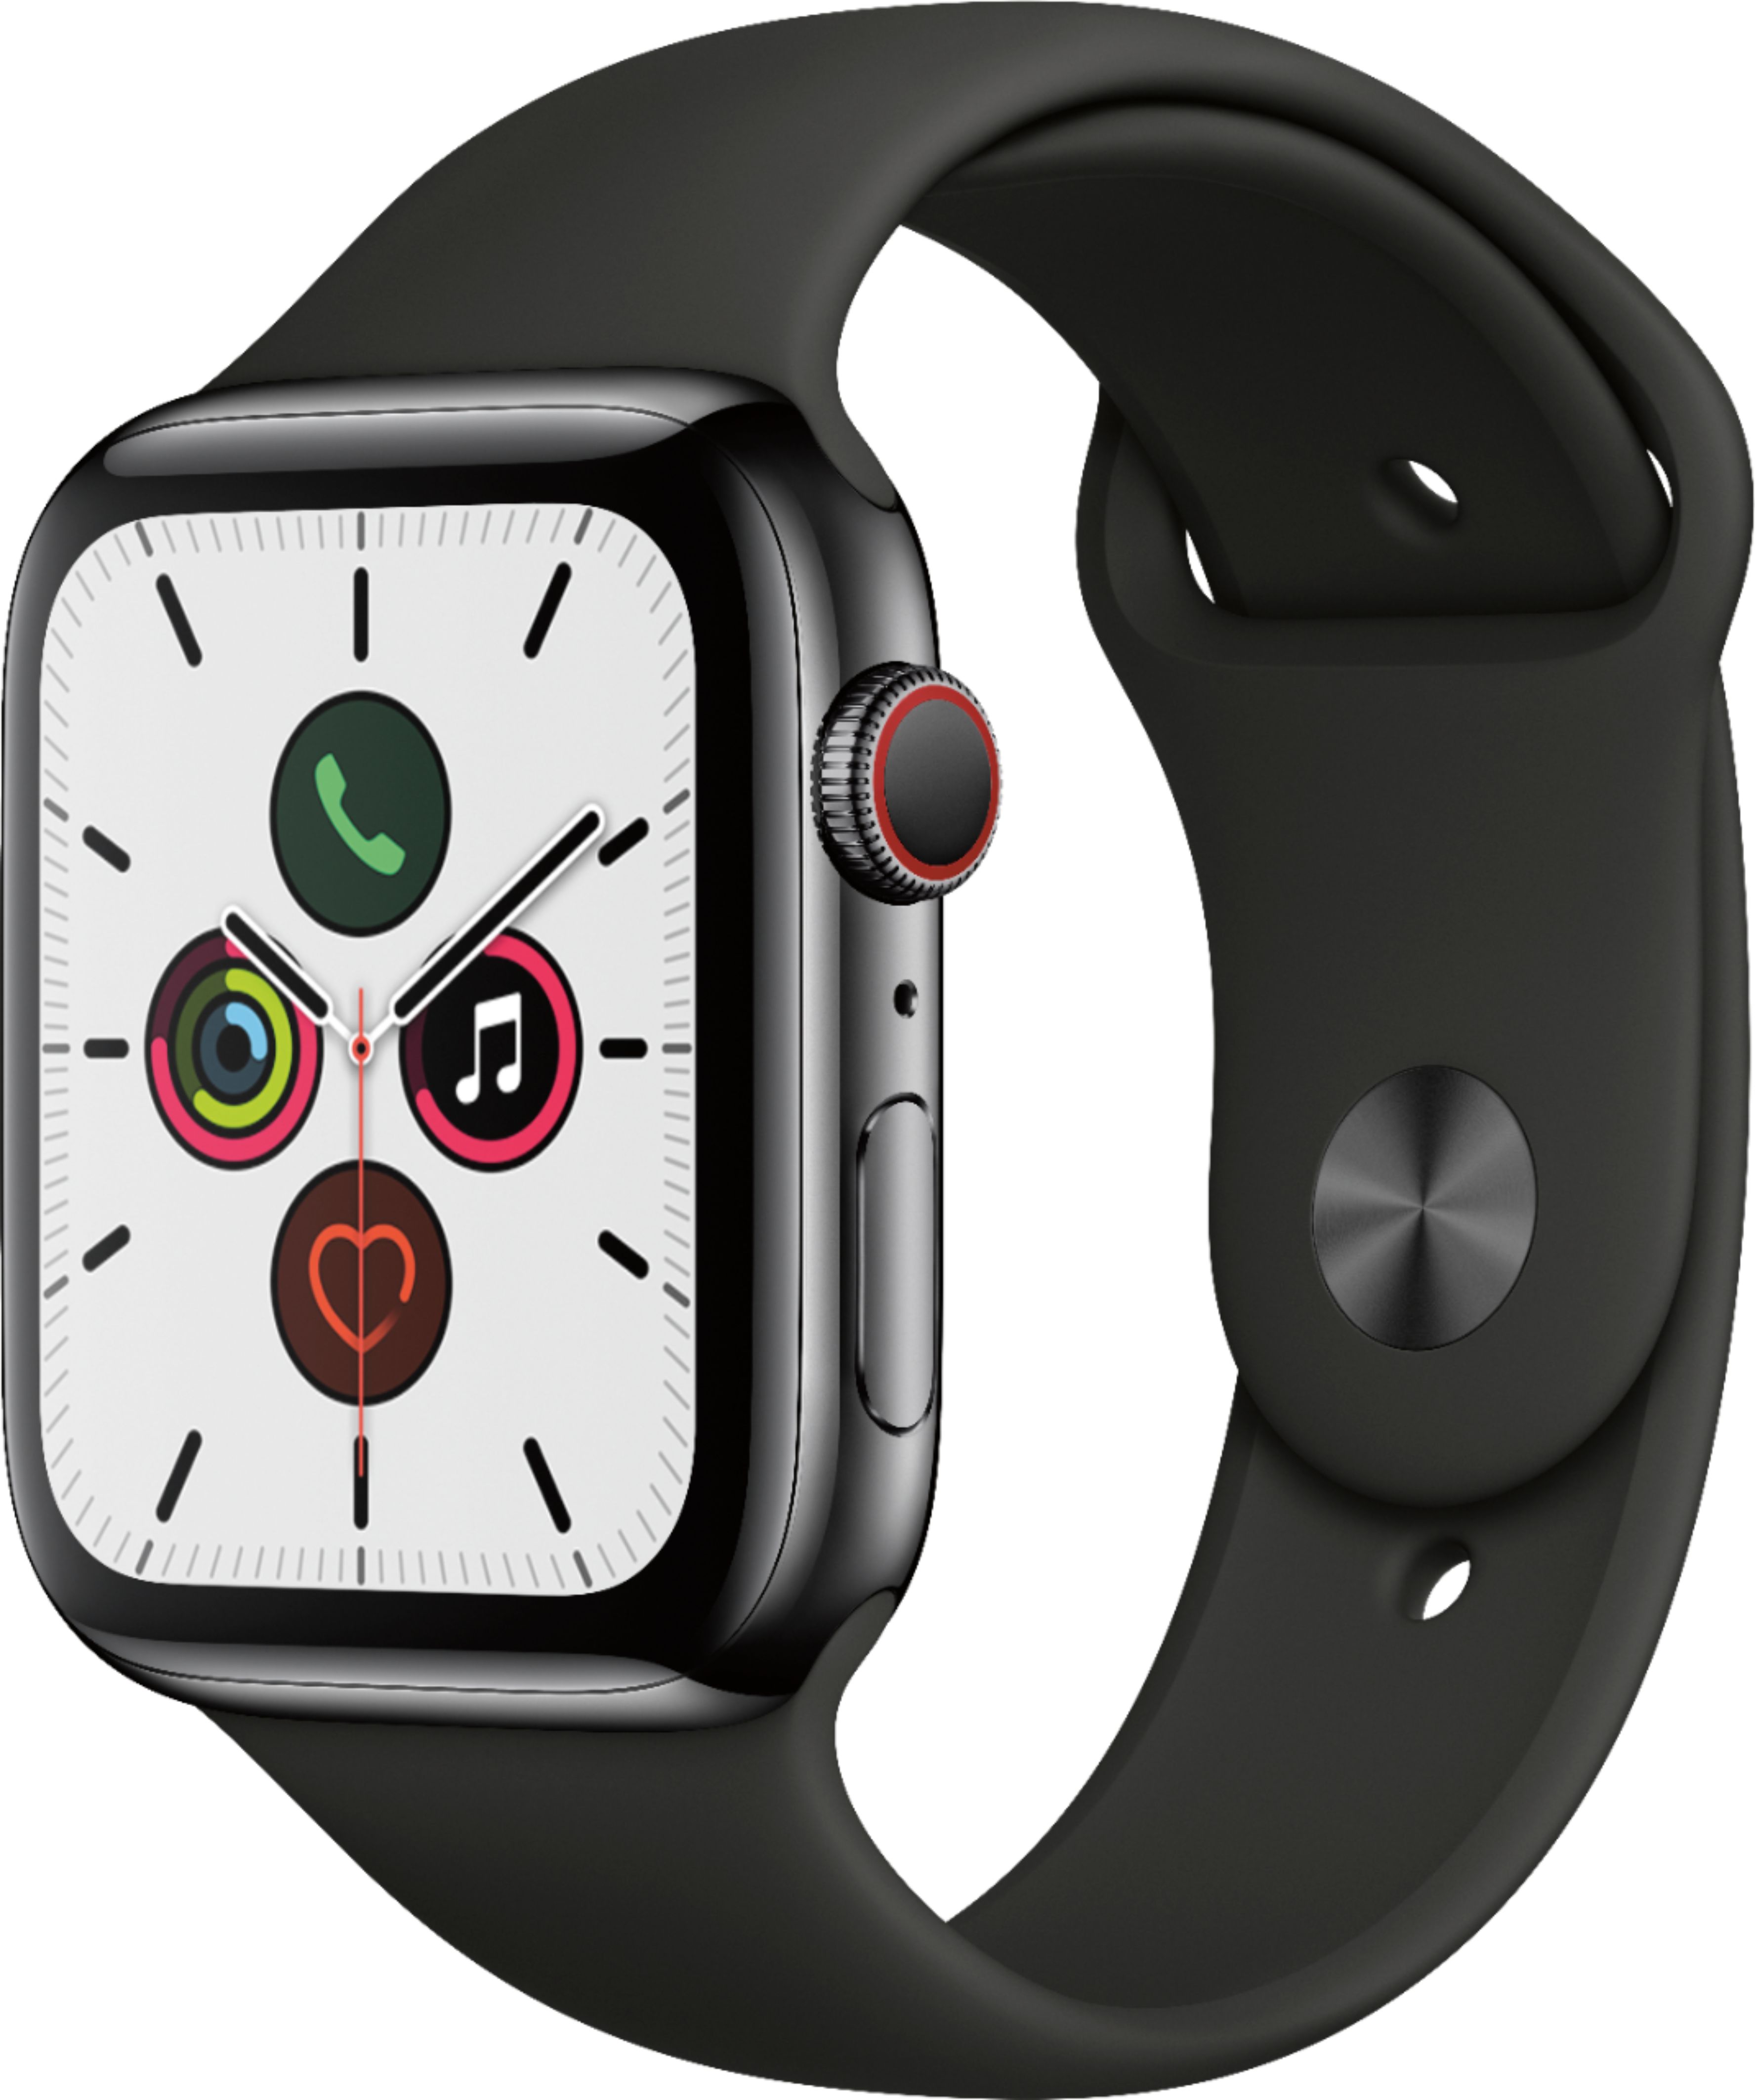 PC/タブレット PC周辺機器 Best Buy: Apple Watch Series 5 (GPS + Cellular) 44mm Stainless Steel Case  with Black Sport Band Space Black Stainless Steel MWW72LL/A